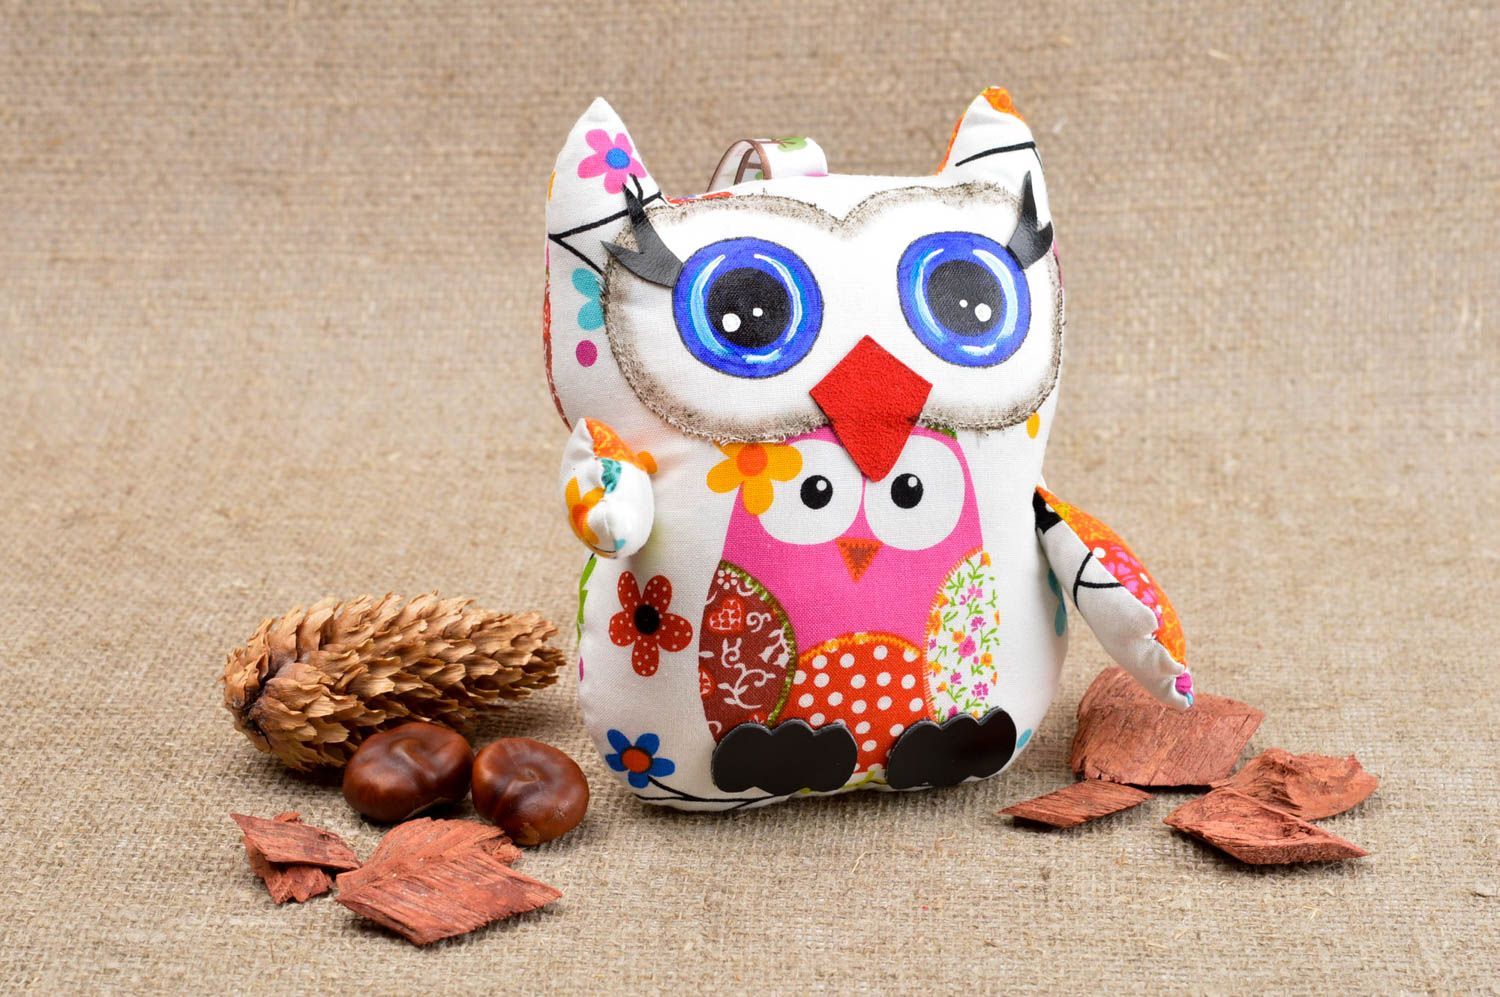 Beautiful handmade soft toy best toys for kids interior decorating gift ideas photo 1